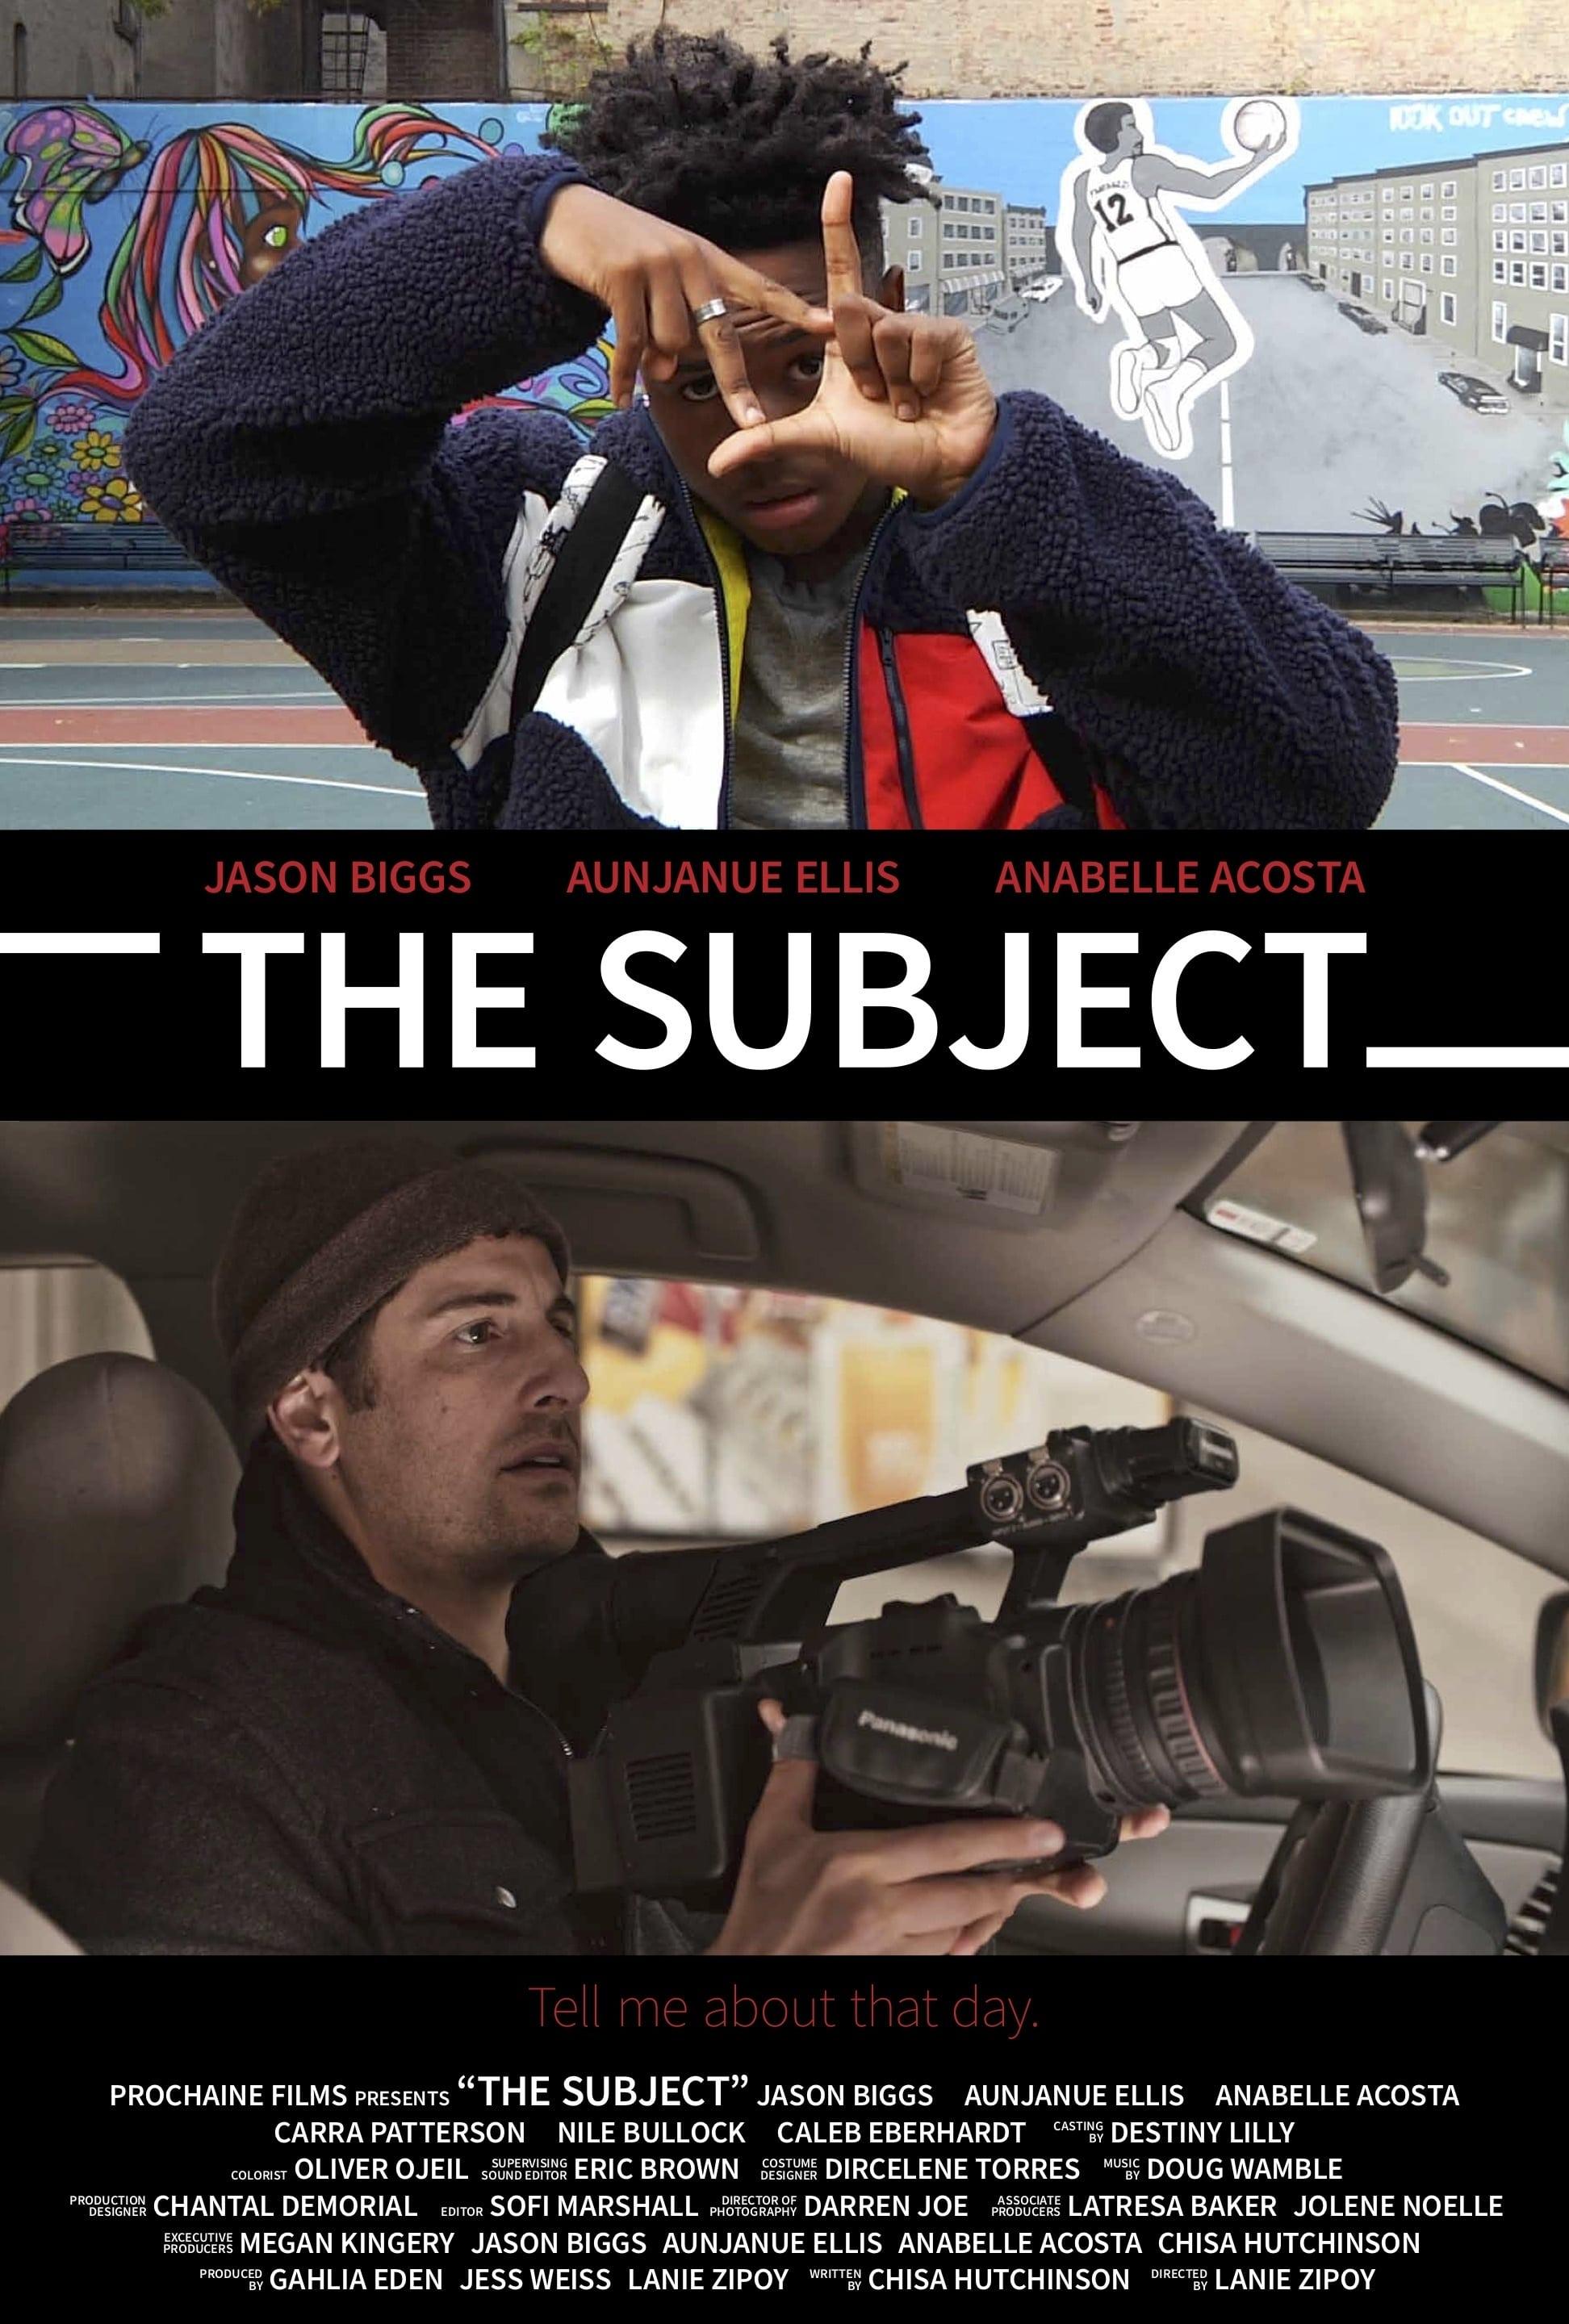 The Subject poster